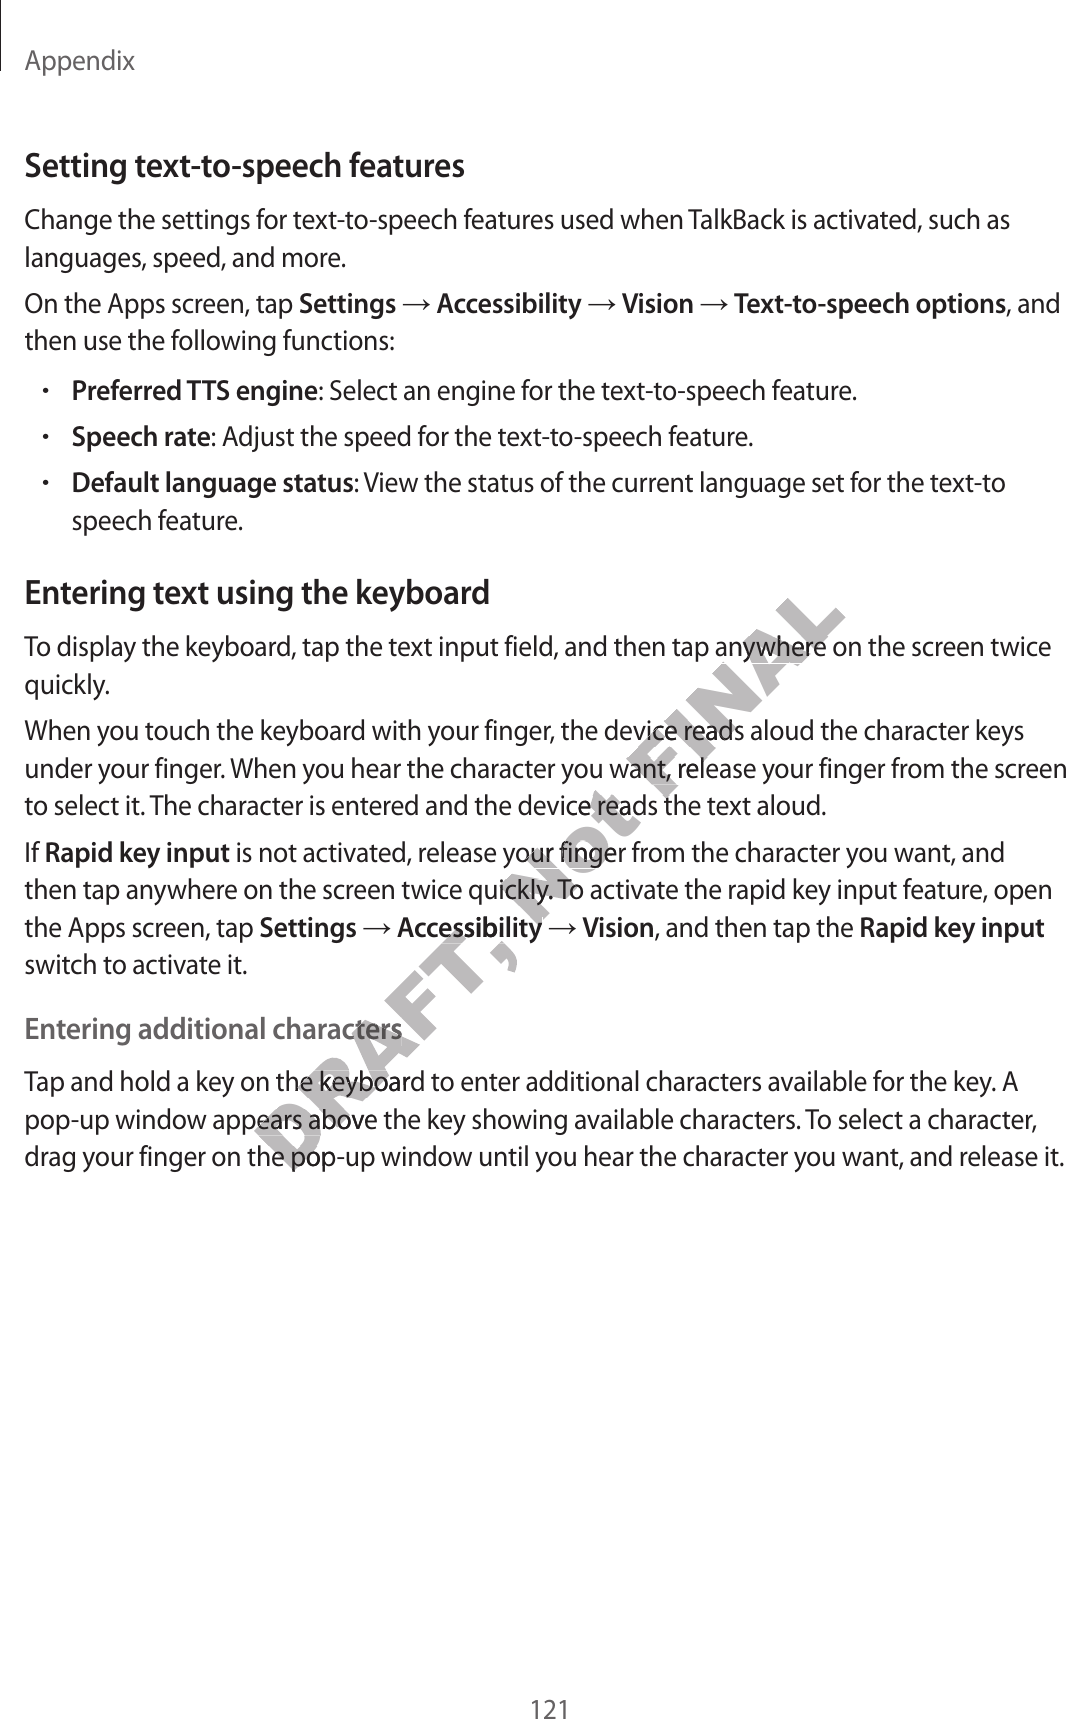 Appendix121Setting text-to-speech featur esChange the settings for t ext-to-speech featur es used when TalkBack is activated, such as languages, speed , and mor e .On the Apps screen, tap Settings  Accessibility  Vision  Text-to-speech options, and then use the follo wing functions:•Preferred TTS engine: Select an engine f or the te xt-to-speech featur e .•Speech rat e: Adjust the speed f or the t ext-to-speech featur e .•Default language status: View the status of the curren t language set f or the t ext-tospeech featur e.Entering t e xt using the keyboardTo display the keyboar d , tap the text input field, and then tap an ywhere on the scr een twice quickly.When you t ouch the keyboar d with y our finger, the device reads aloud the character keys under your finger. When you hear the character you want, r elease y our finger fr om the scr een to select it. The character is entered and the devic e r eads the t ext aloud.If Rapid key input is not activated, r elease y our finger fr om the character y ou want , and then tap anywhere on the scr een twice quickly.  To activate the r apid key input f eatur e, open the Apps screen, tap Settings  Accessibility  Vision, and then tap the Rapid key input switch to activate it.Entering additional char actersTap and hold a key on the keyboard to ent er additional characters av ailable f or the key. A pop-up window appears above the key showing a v ailable characters. To select a character, drag your finger on the pop-up window until y ou hear the character y ou want , and r elease it.DRAFT, AccessibilityDRAFT, AccessibilityEntering additional char actersDRAFT, Entering additional char actersDRAFT, Tap and hold a key on the keyboard to ent er additional characters av ailable f or the key. A DRAFT, Tap and hold a key on the keyboard to ent er additional characters av ailable f or the key. A pop-up window appears above the key showing a v ailable characters. To select a character, DRAFT, pop-up window appears above the key showing a v ailable characters. To select a character, DRAFT, drag your finger on the pop-up window until y ou hear the character y ou want , and r elease it.DRAFT, drag your finger on the pop-up window until y ou hear the character y ou want , and r elease it.Not under your finger. When you hear the character you want, r elease y our finger fr om the scr een Not under your finger. When you hear the character you want, r elease y our finger fr om the scr een to select it. The character is entered and the devic e r eads the t ext aloud.Not to select it. The character is entered and the devic e r eads the t ext aloud. is not activated, r elease y our finger fr om the character y ou want , and Not  is not activated, r elease y our finger fr om the character y ou want , and then tap anywhere on the scr een twice quickly.  To activate the r apid key input f eatur e, open Not then tap anywhere on the scr een twice quickly.  To activate the r apid key input f eatur e, open AccessibilityNot AccessibilityFINALTo display the keyboar d , tap the text input field, and then tap an ywhere on the scr een twice FINALTo display the keyboar d , tap the text input field, and then tap an ywhere on the scr een twice When you t ouch the keyboar d with y our finger, the device reads aloud the character keys FINALWhen you t ouch the keyboar d with y our finger, the device reads aloud the character keys under your finger. When you hear the character you want, r elease y our finger fr om the scr een FINALunder your finger. When you hear the character you want, r elease y our finger fr om the scr een to select it. The character is entered and the devic e r eads the t ext aloud.FINALto select it. The character is entered and the devic e r eads the t ext aloud.